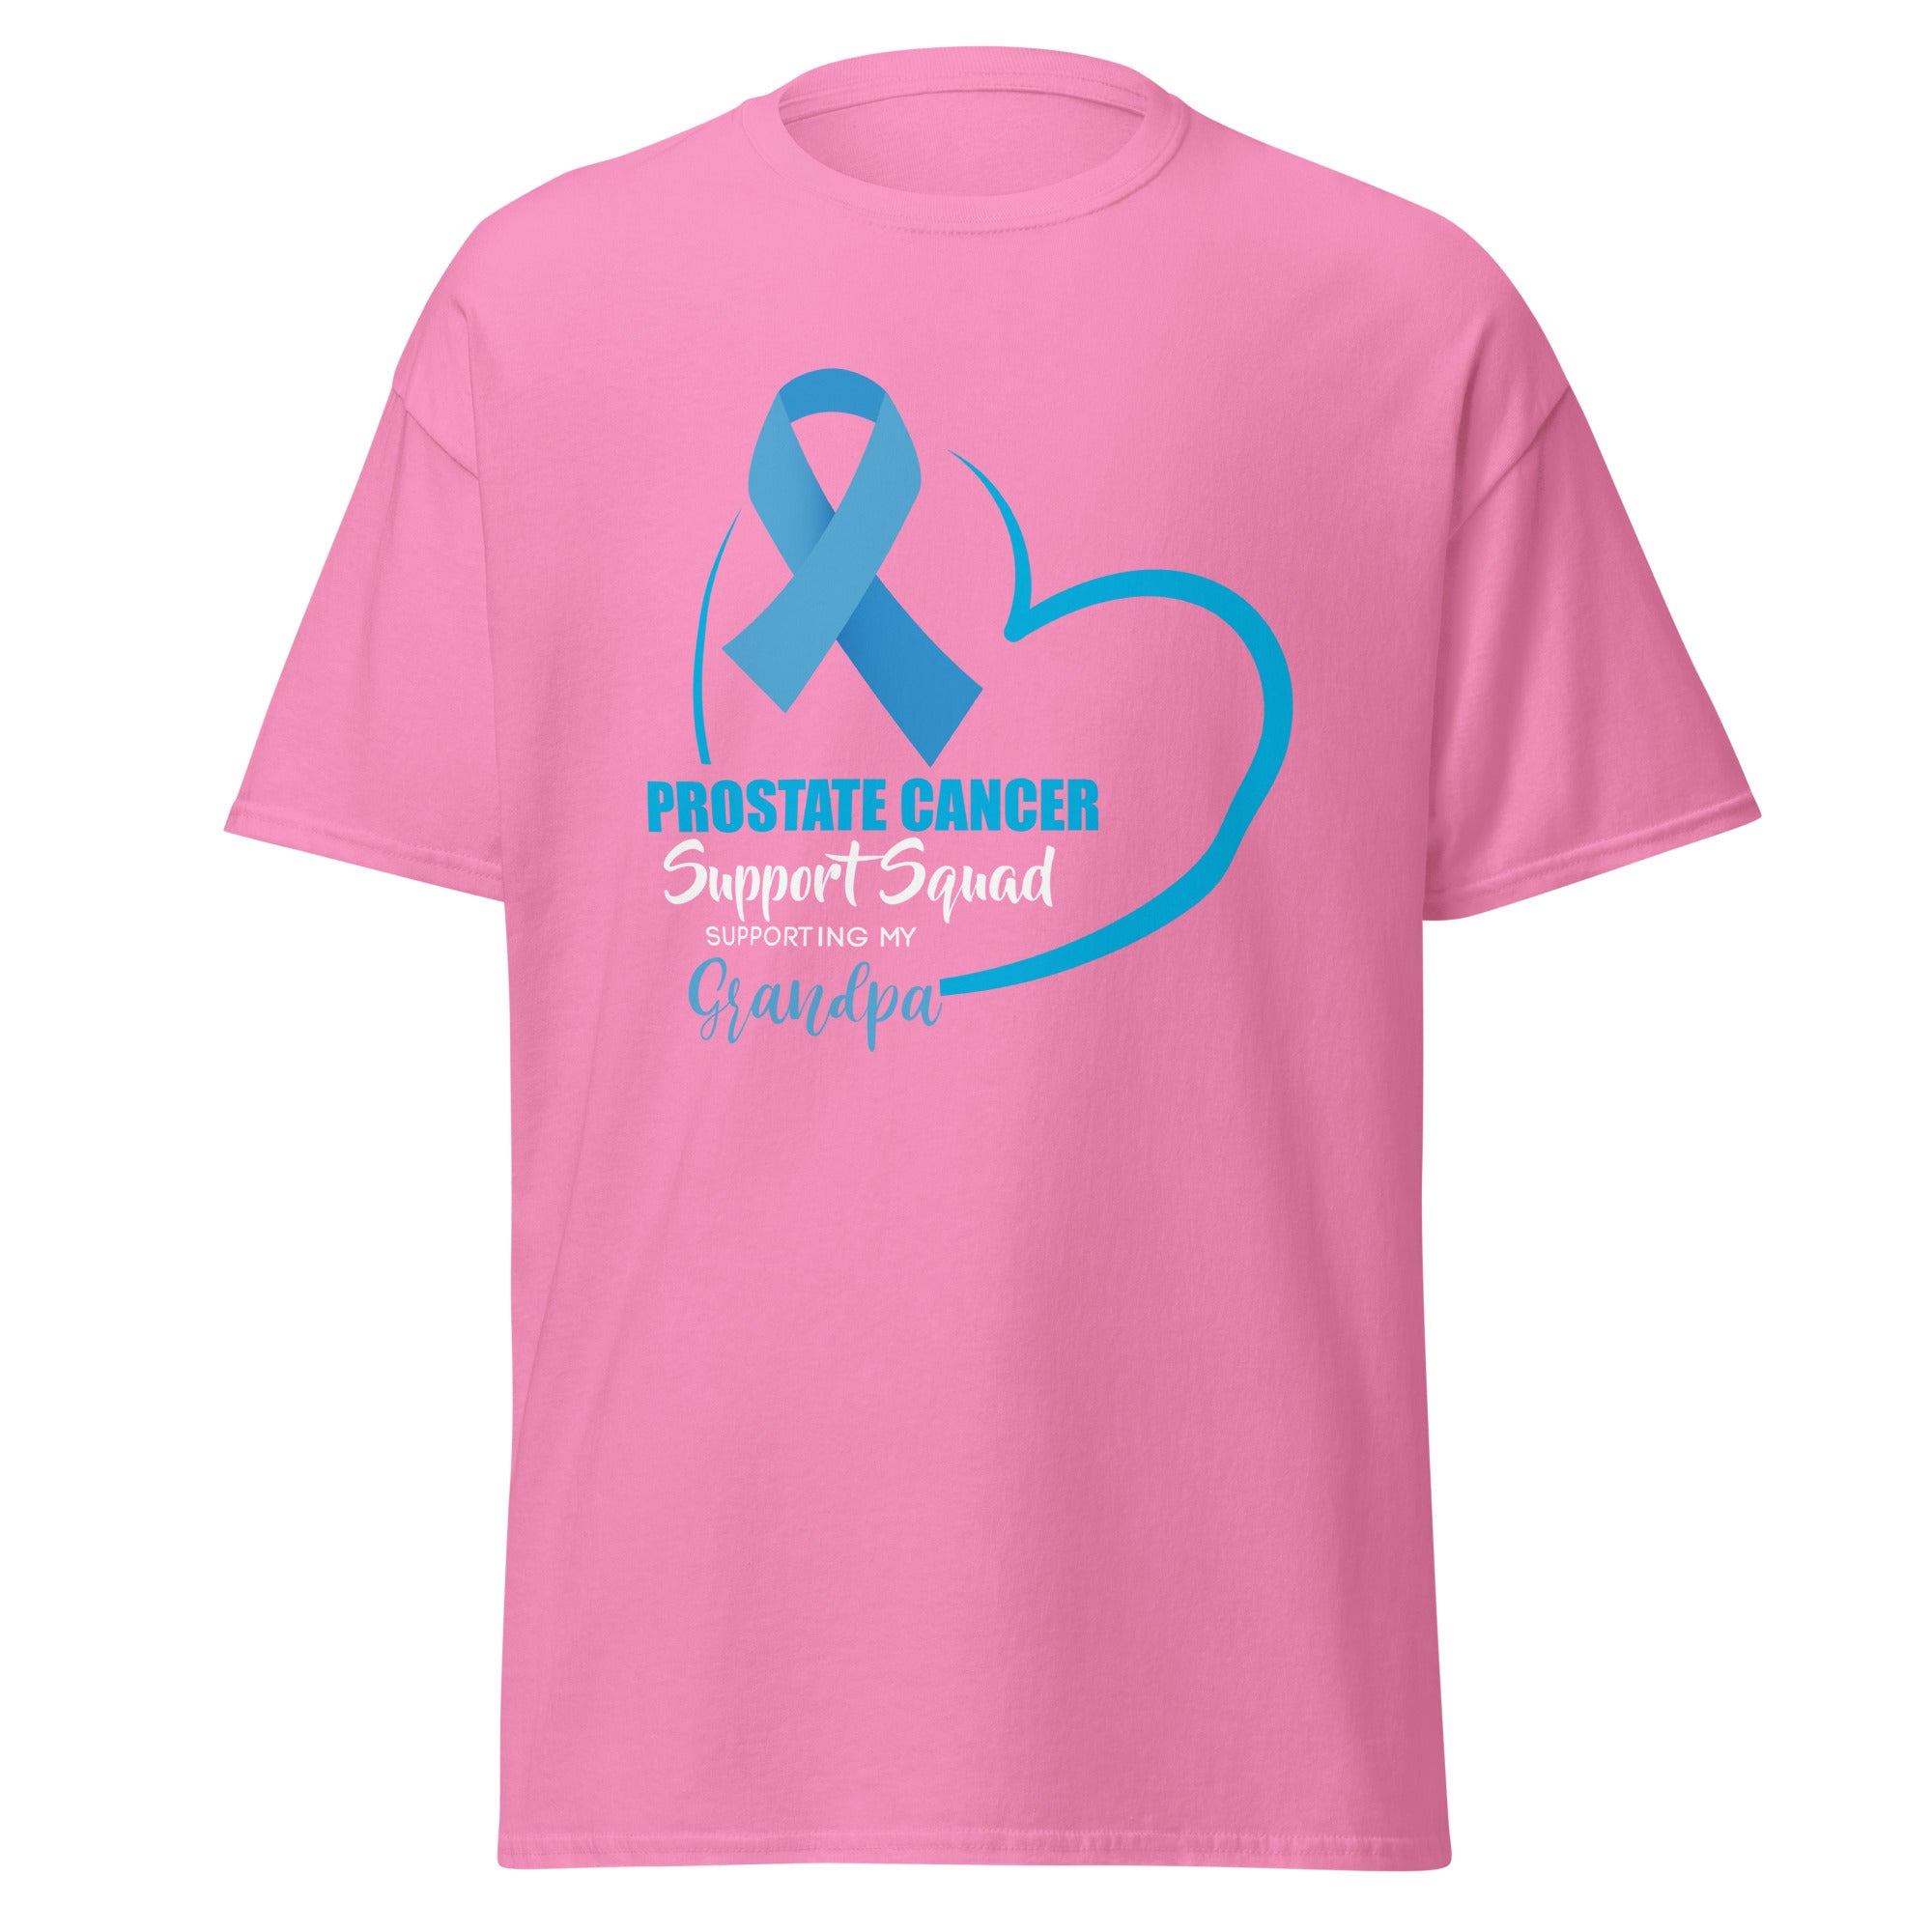 Prostate Cancer Support Squad - Grandpa Tee